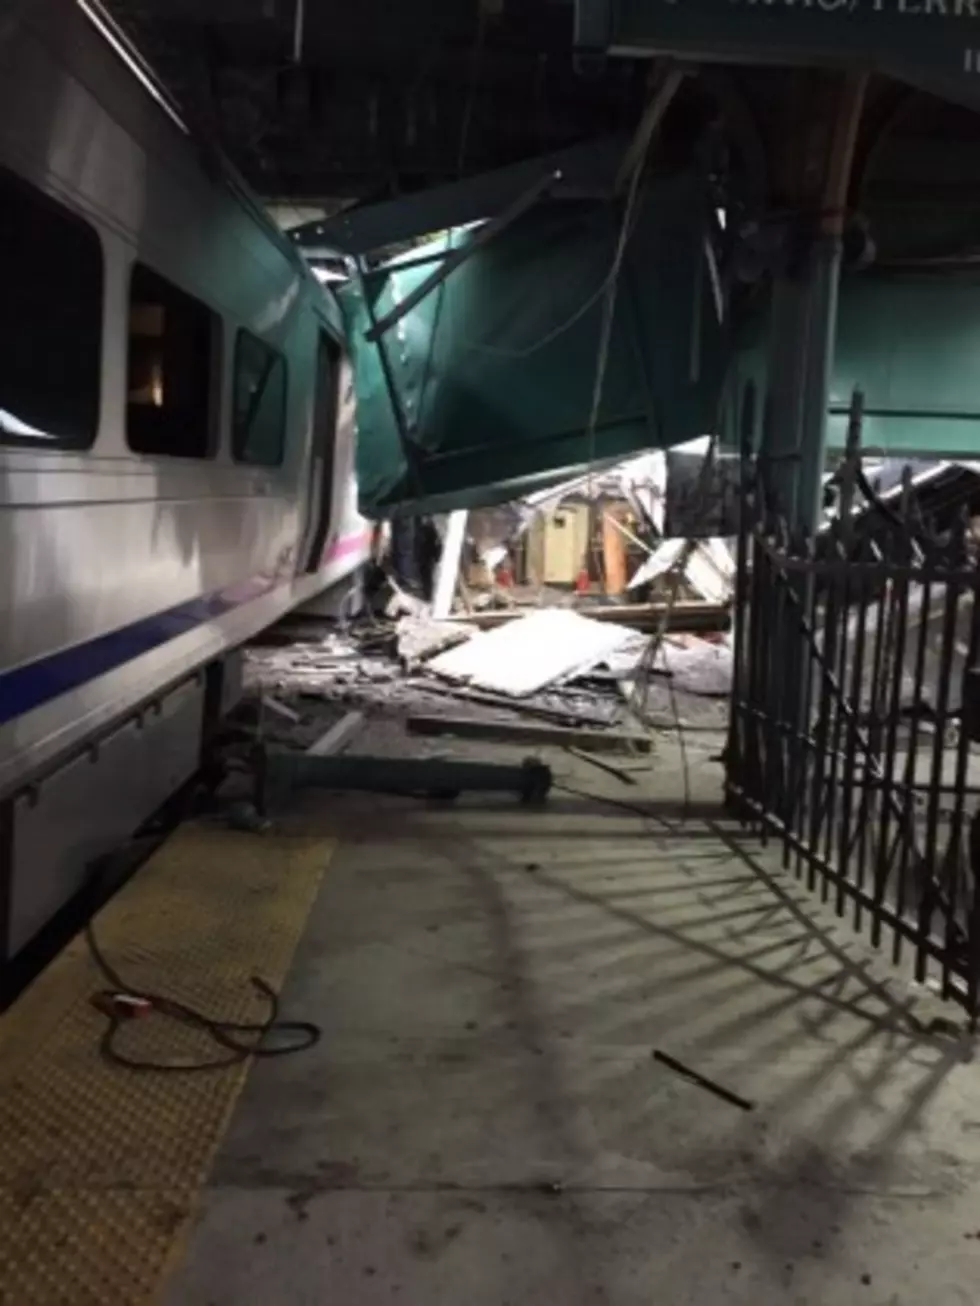 New Jersey Transit Train Crashes: Over 100 Injured, Several Dead [LIVE VIDEO]